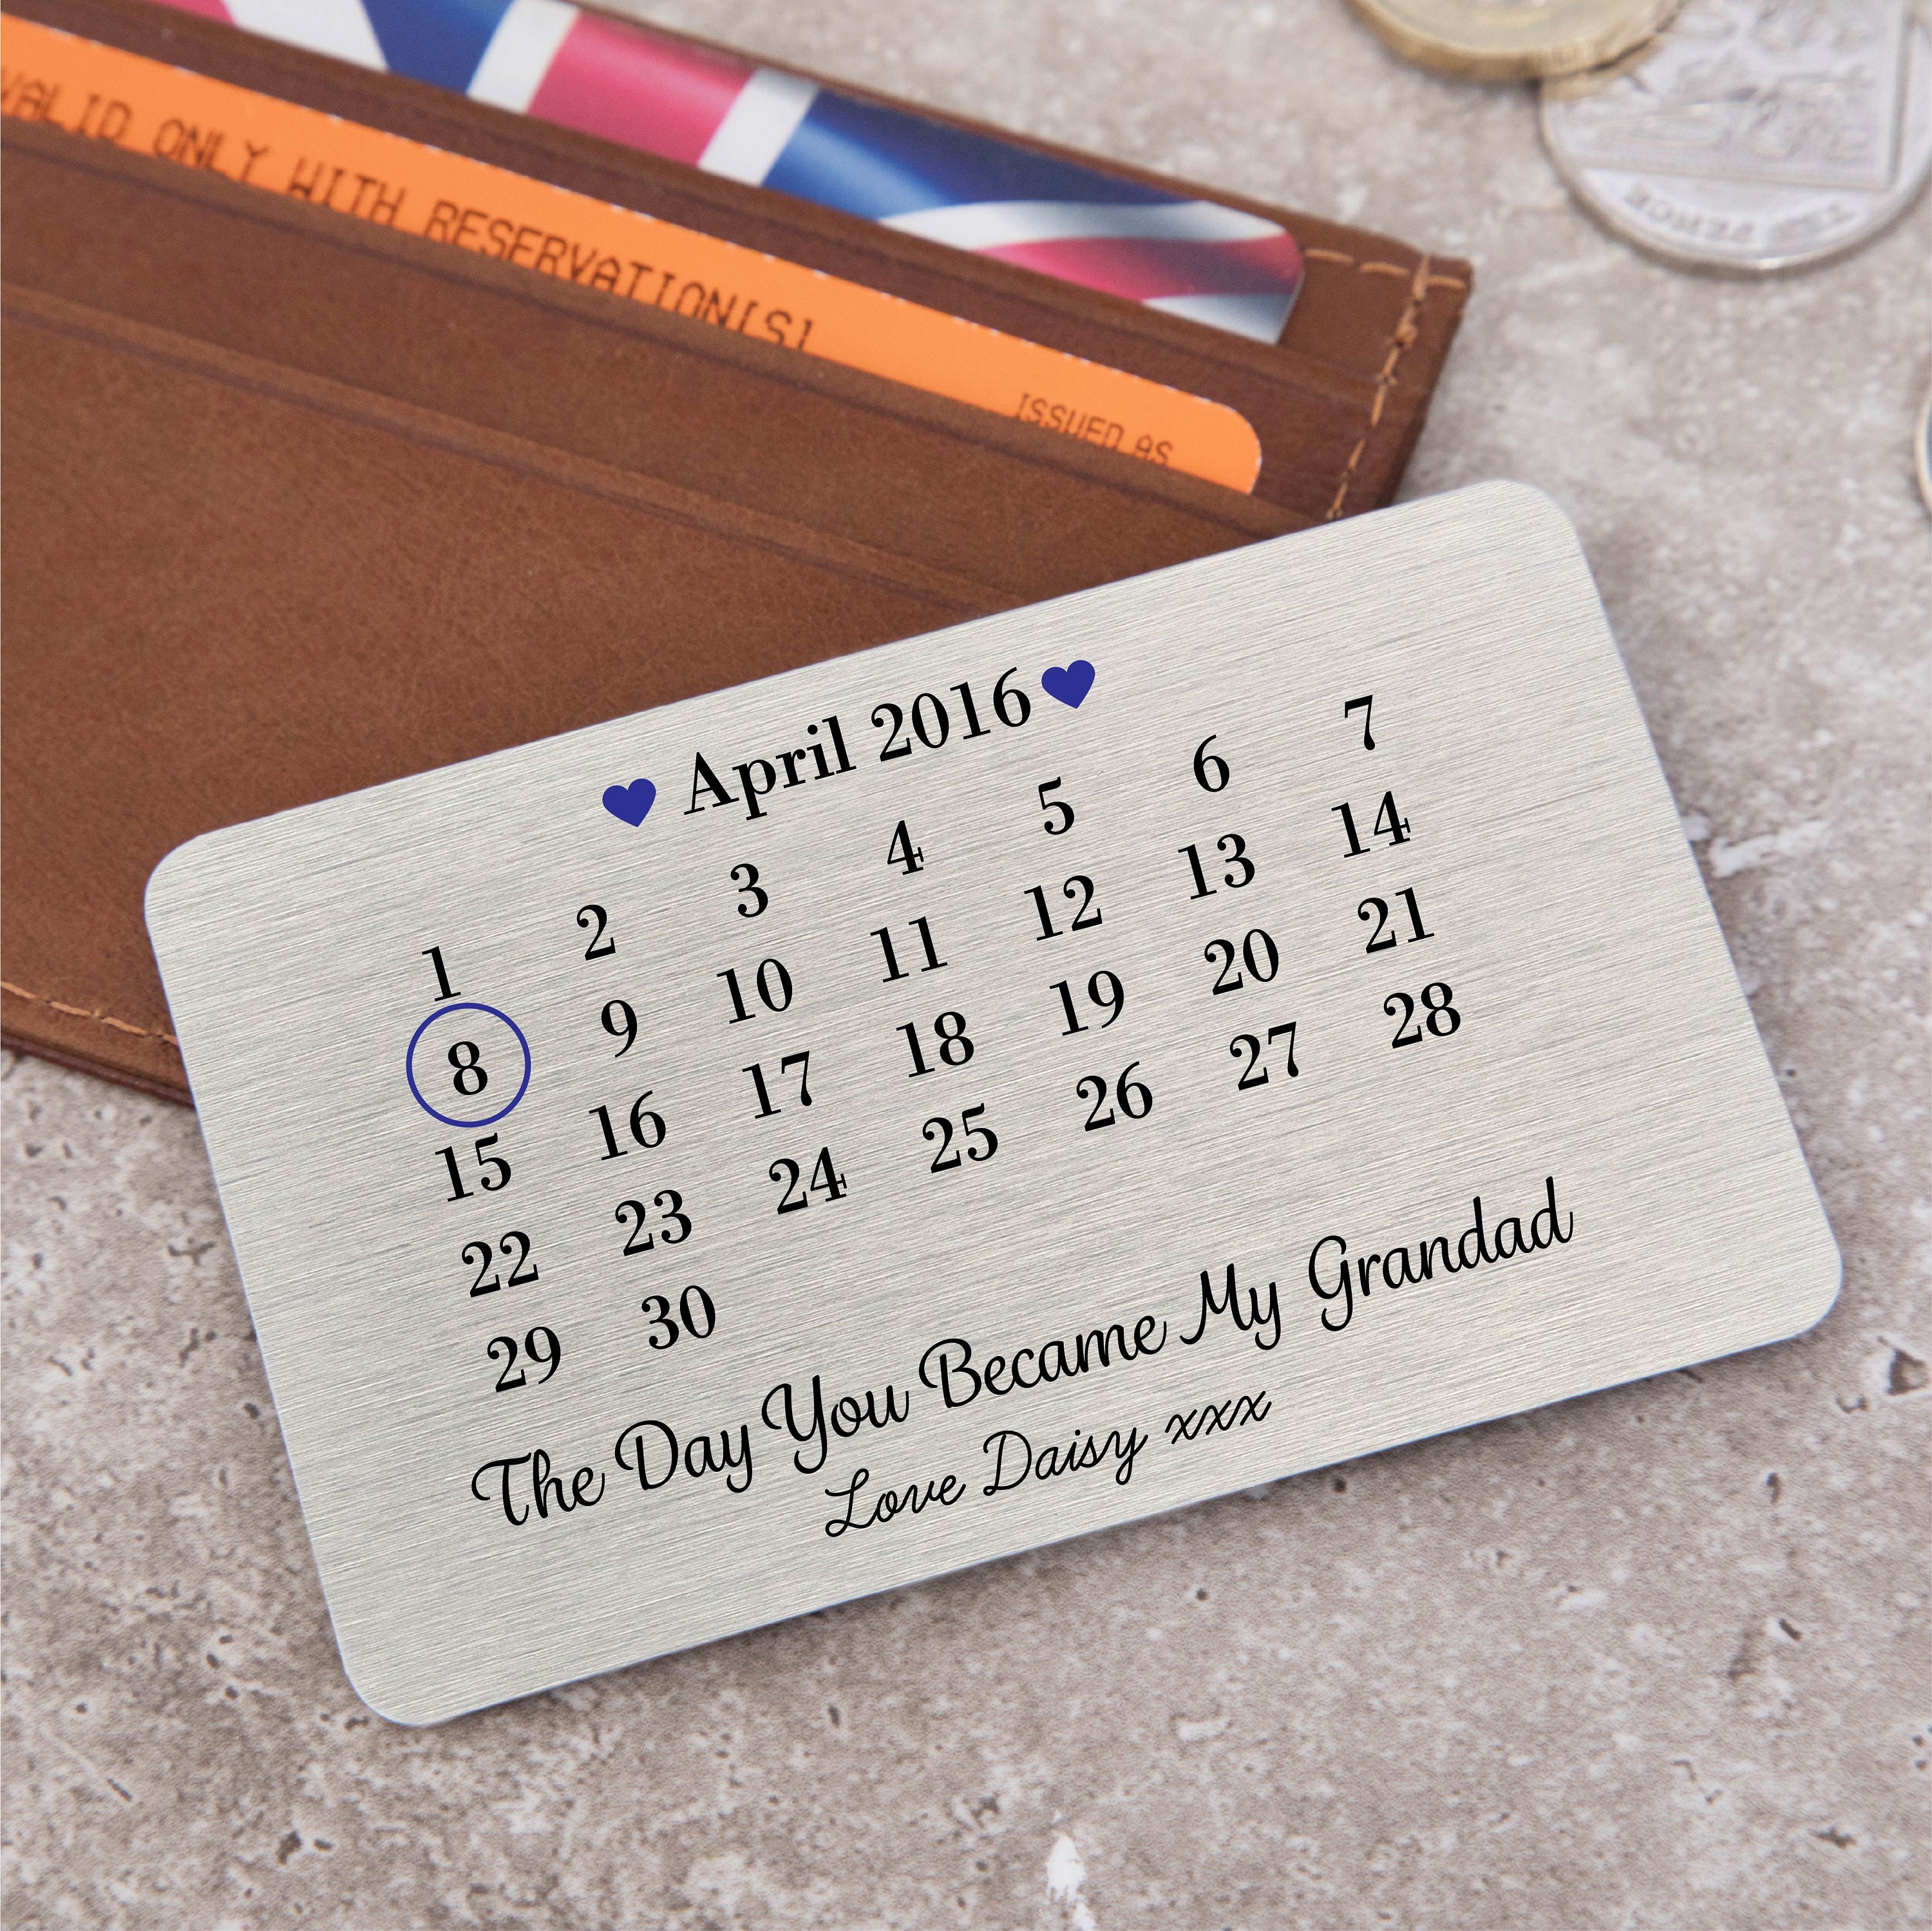 To My Grandson Never from Love Grandma Tall Engraved Customized Money Clip Holder for Gift Birthday Graduation Wedding Groomsman Holiday Tassen & portemonnees Portemonnees & Geldclips Geldclips 